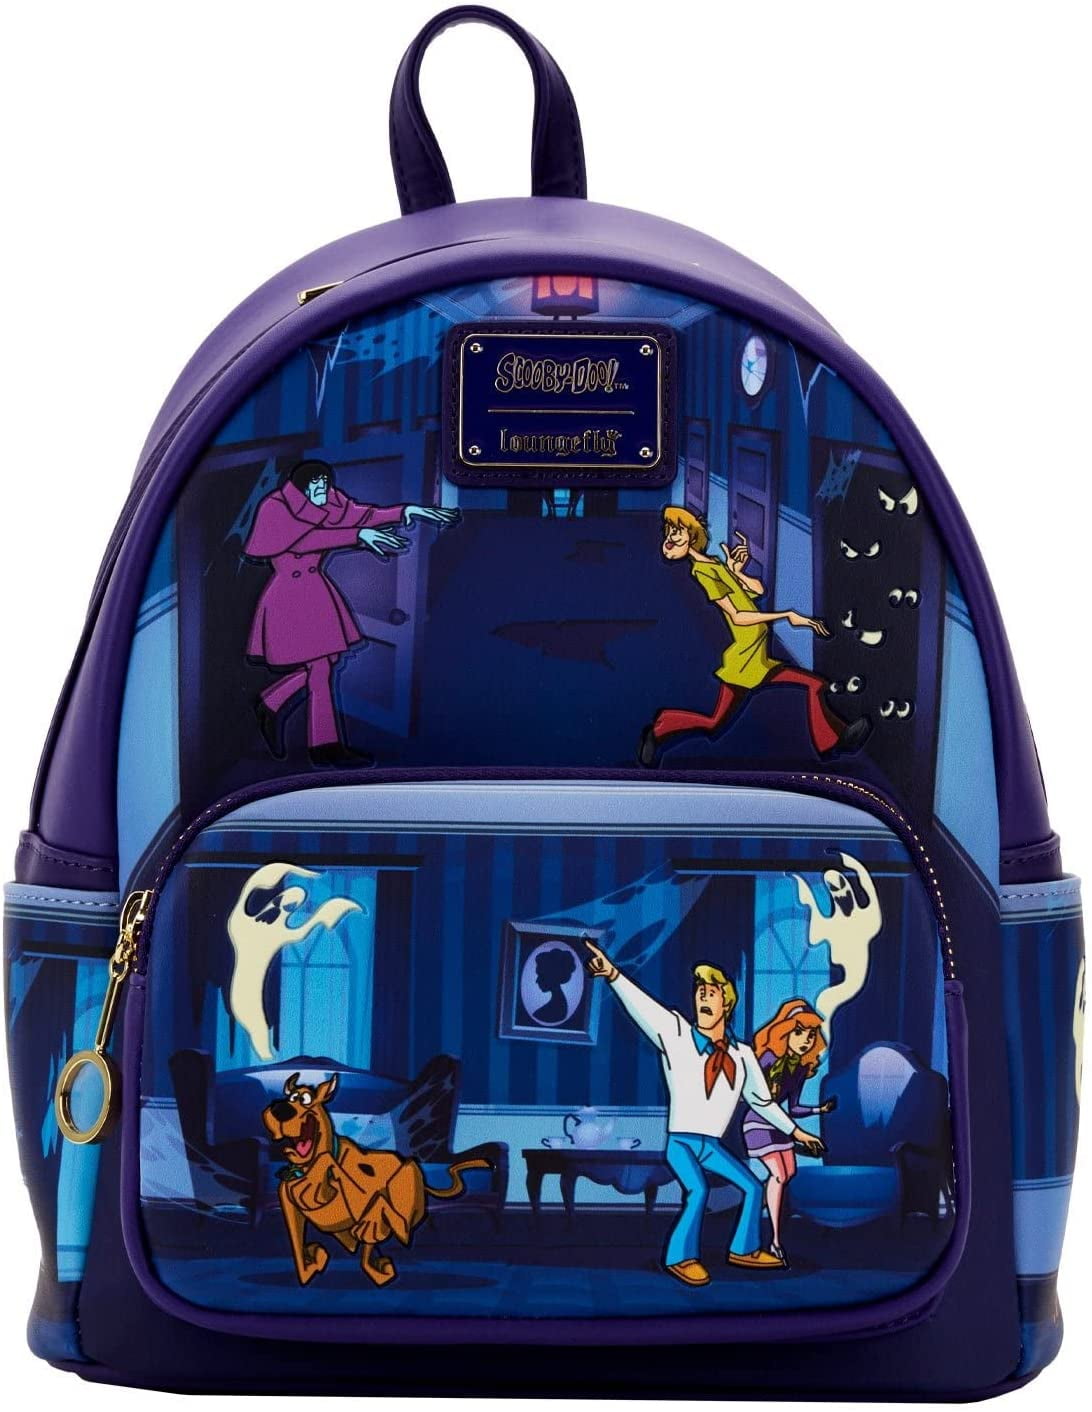 Mummy Cosplay Mini Backpack Scooby Doo Loungefly | Backpack | Free shipping  over £20 | HMV Store